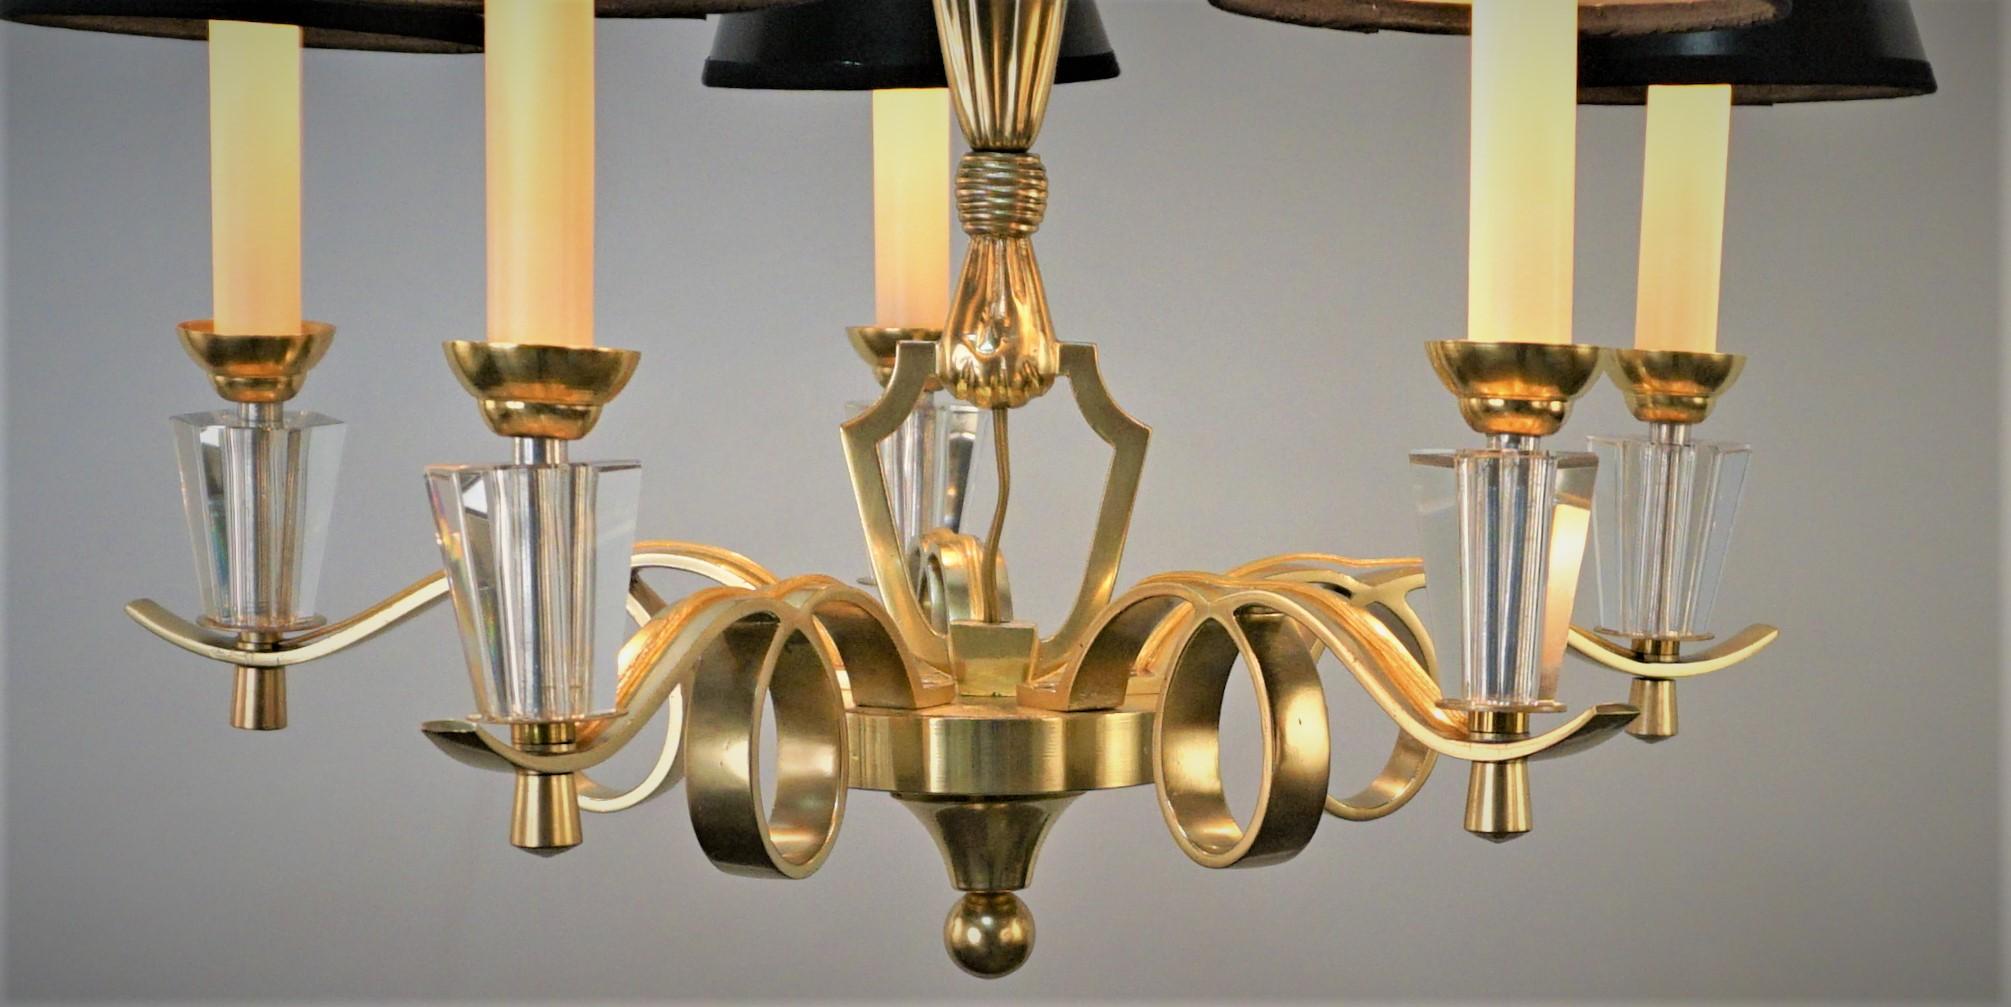 Modernist design satin finished bronze with crystal five light chandelier.
Professionally rewired and ready for installation, black lampshades with gold liner added and included.
Measurement: without the lampshades.